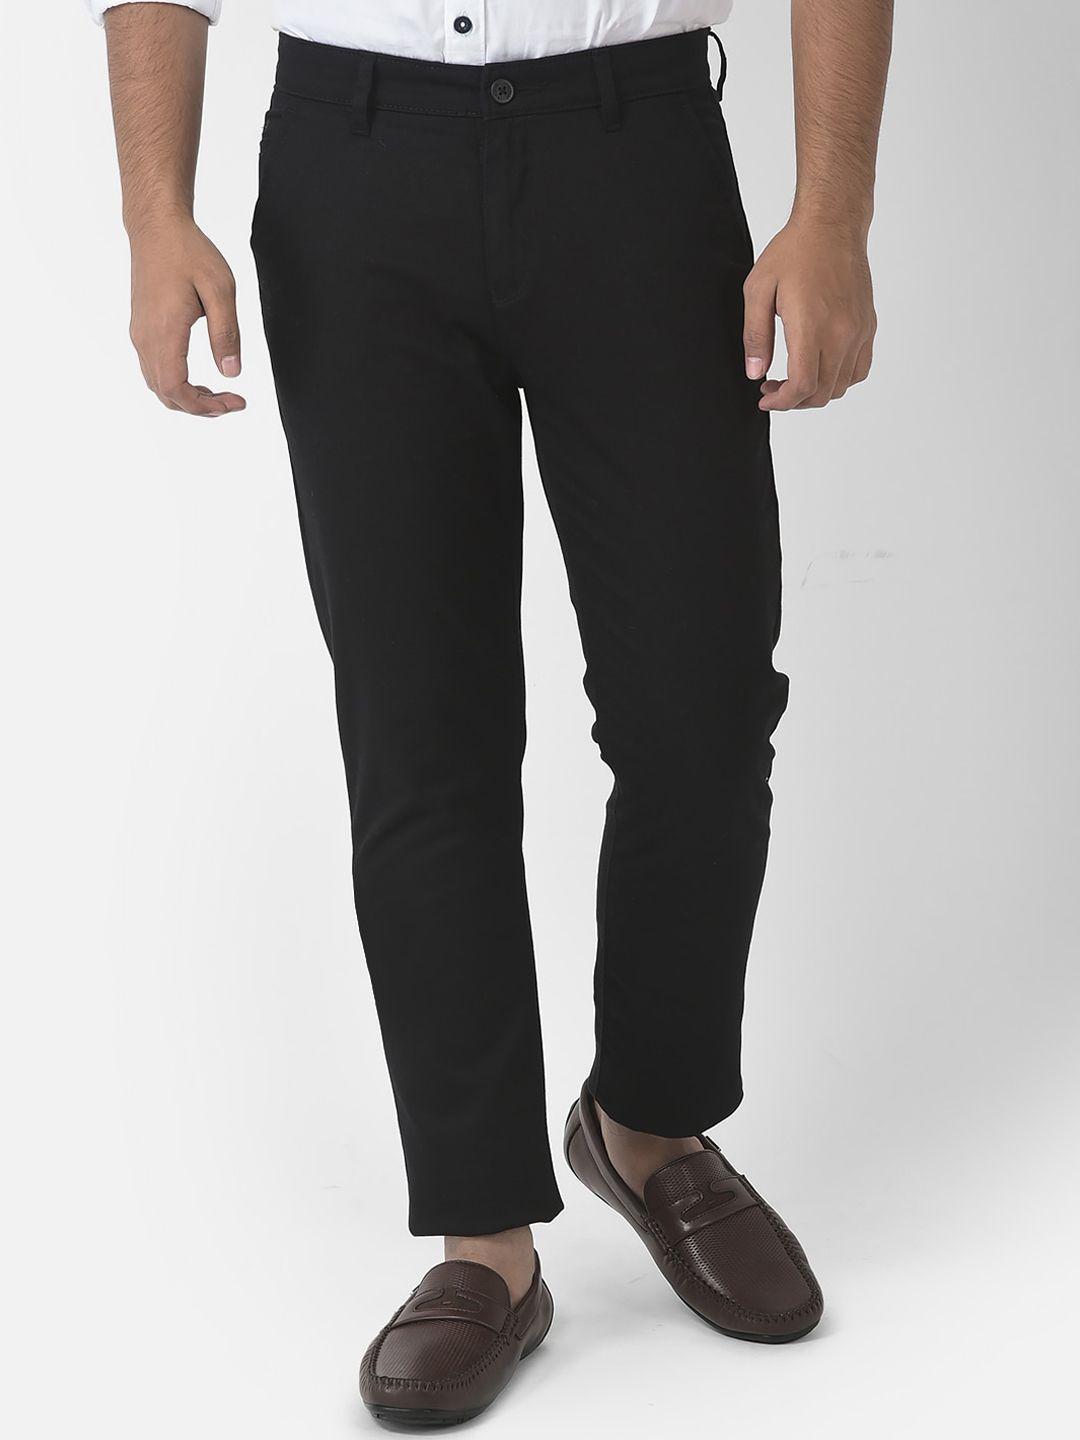 crimsoune-club-boys-relaxed-cotton-chinos-trousers